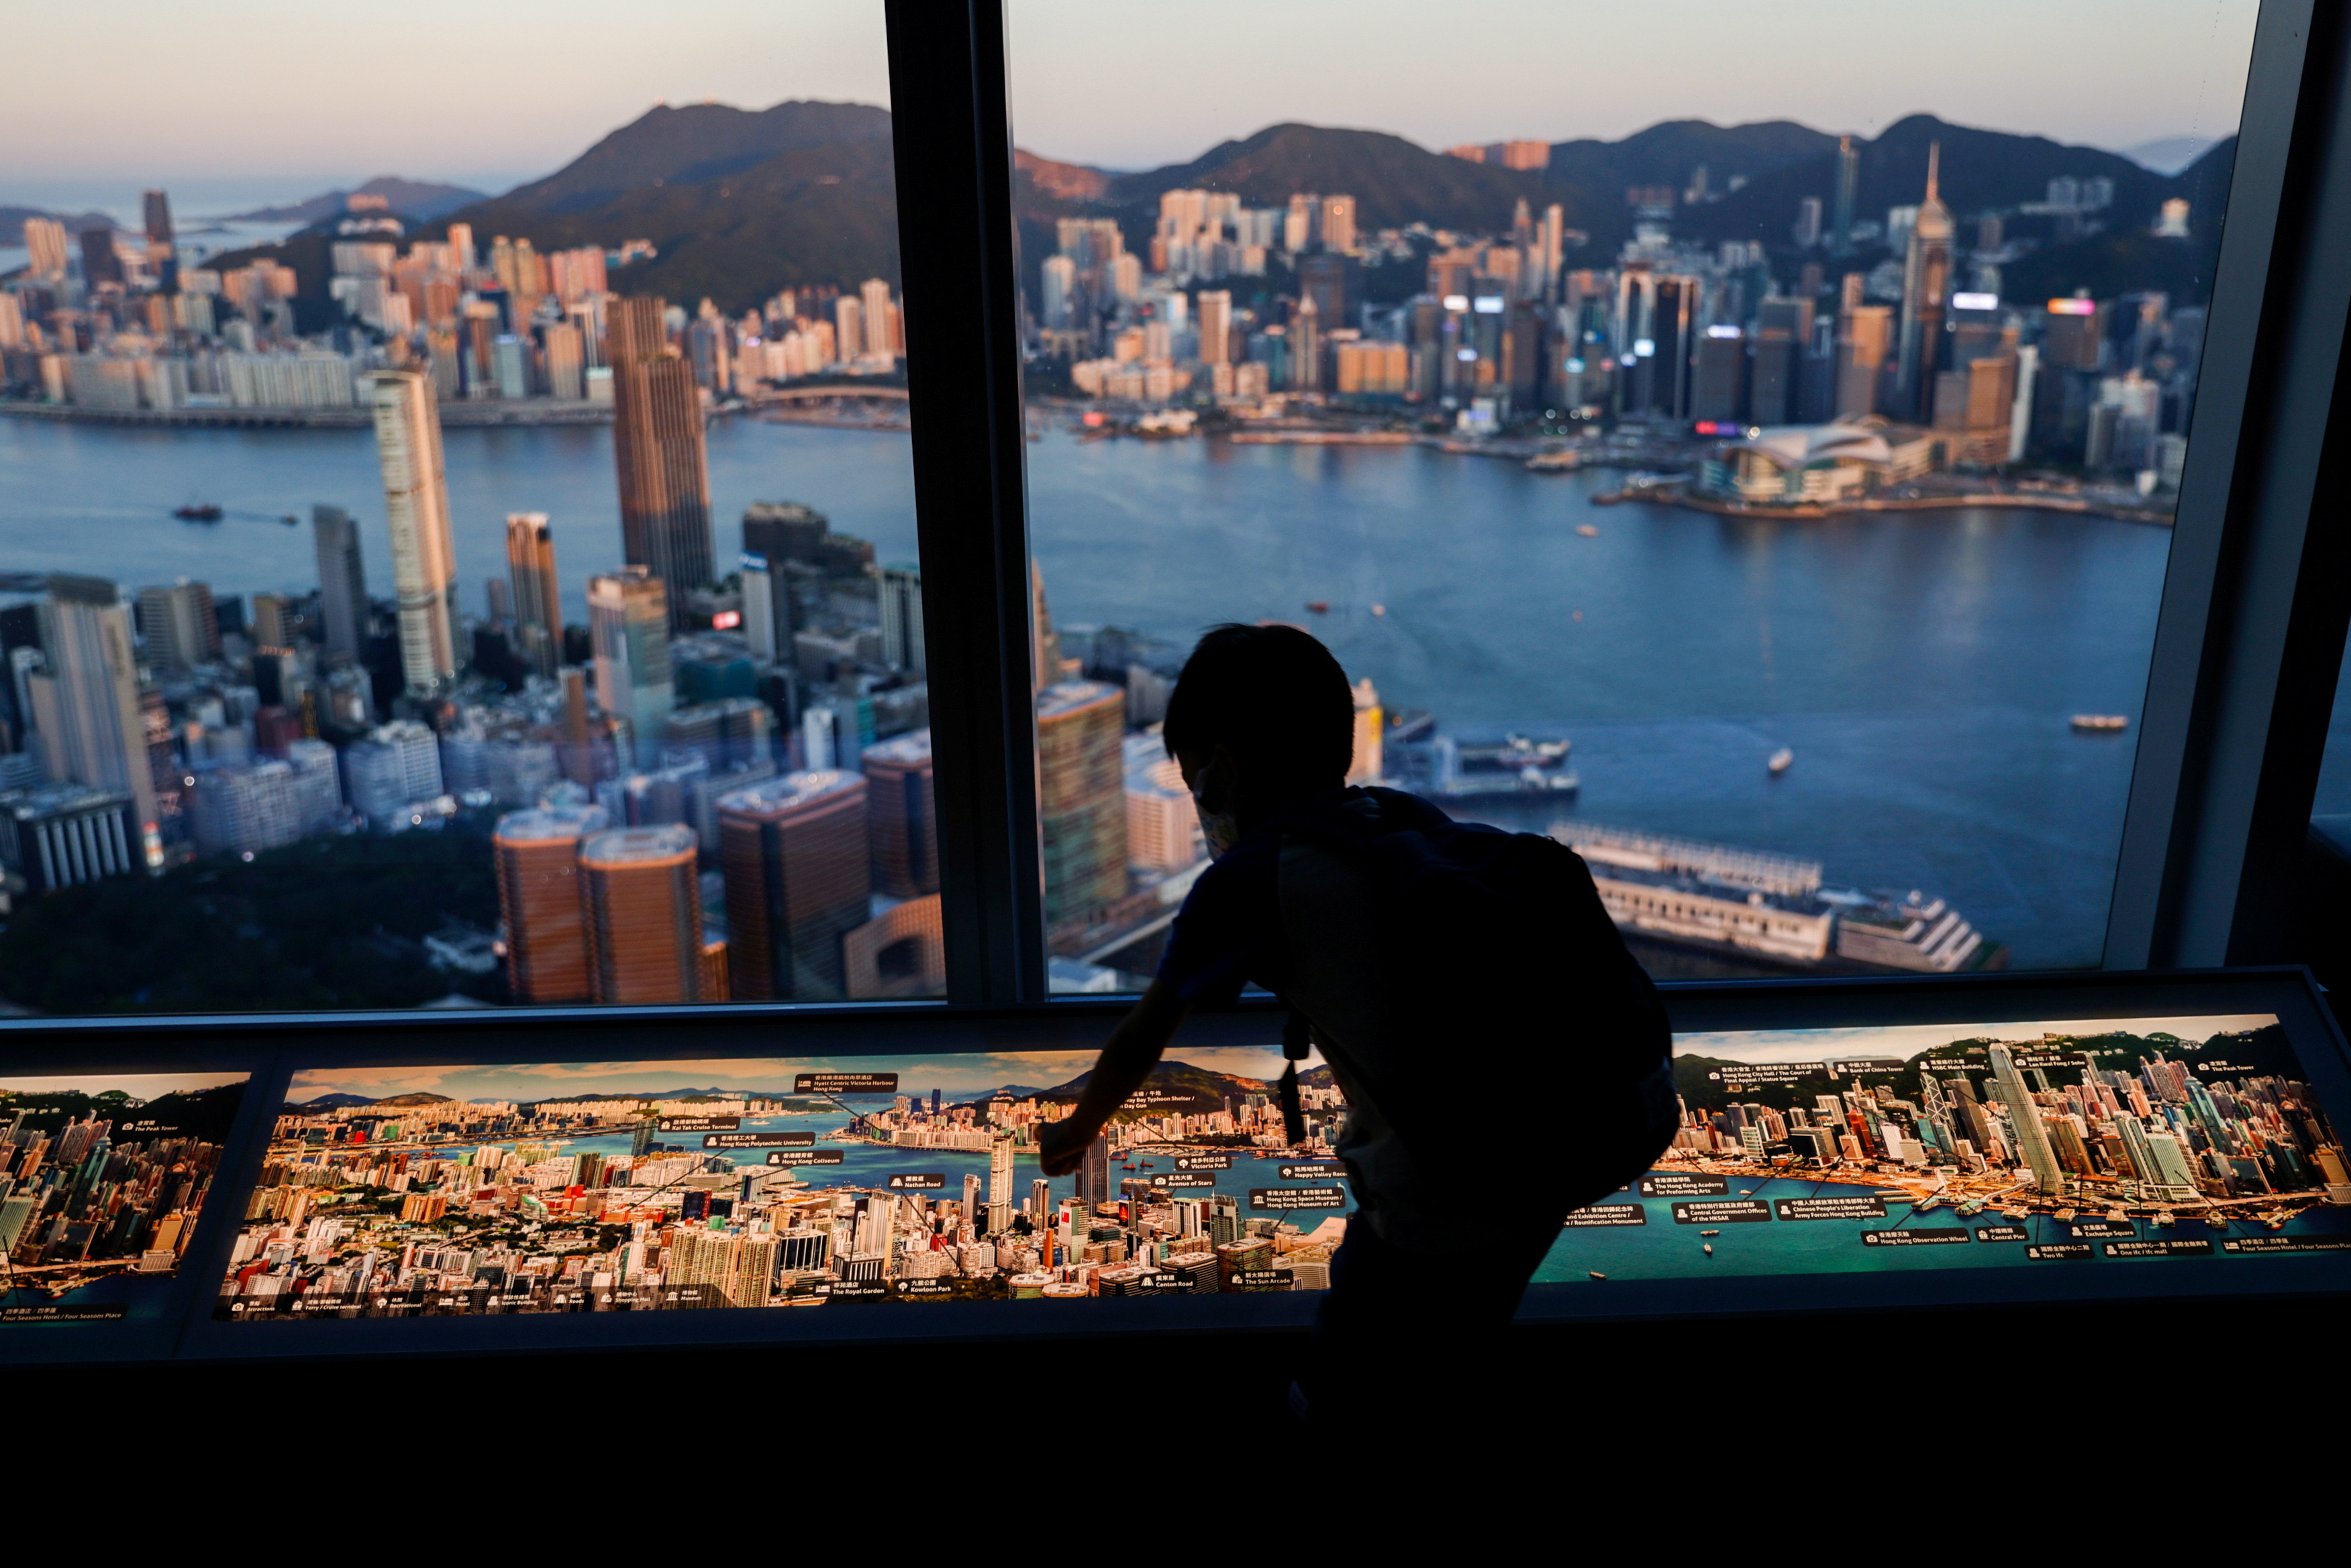 A child plays in front of skyline buildings, in Hong Kong, China July 13, 2021. REUTERS/Tyrone Siu/File Photo